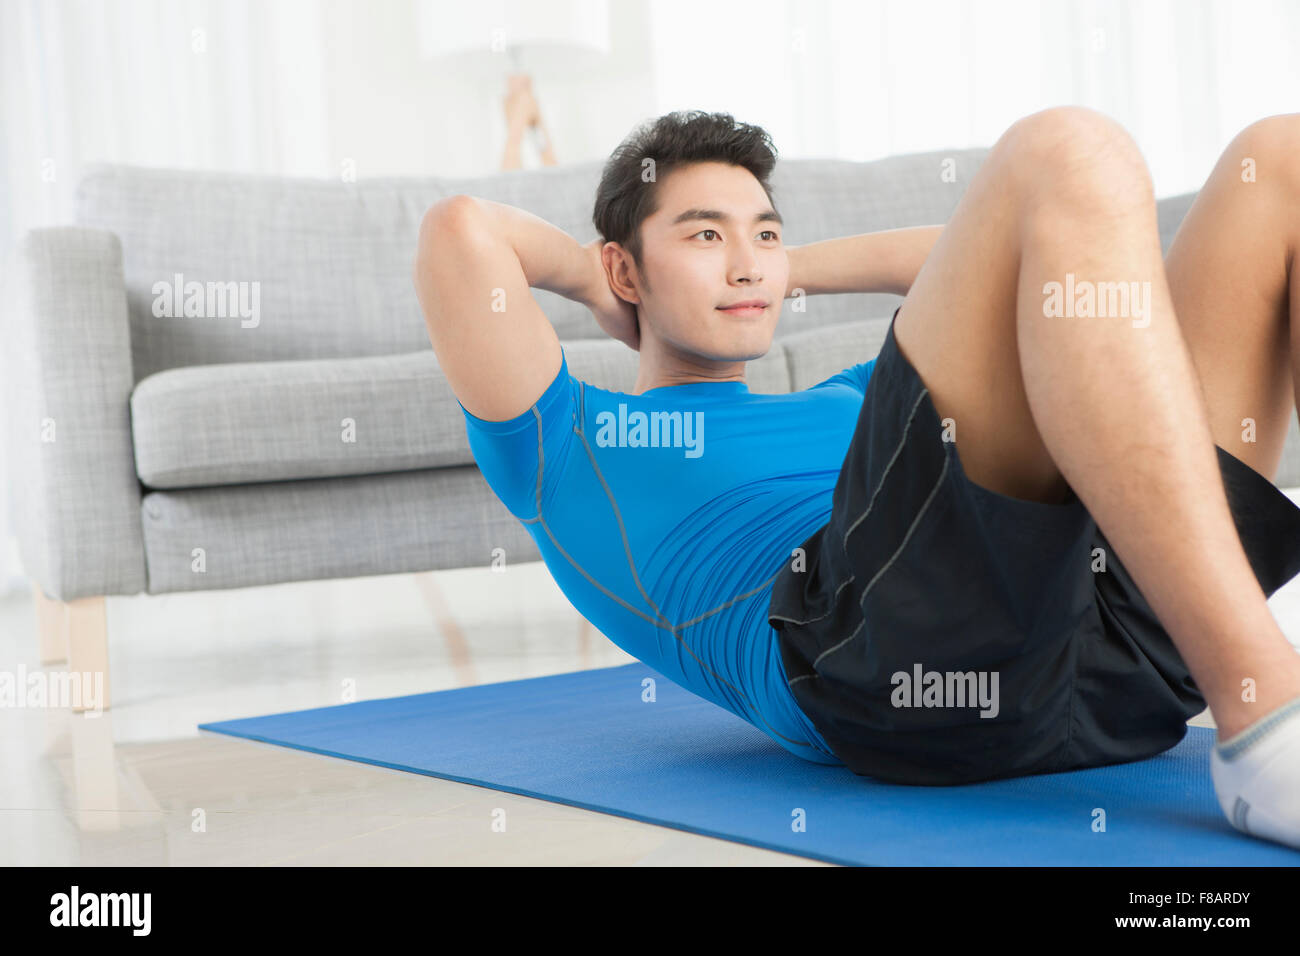 Man doing sit-up on mat in living room Stock Photo